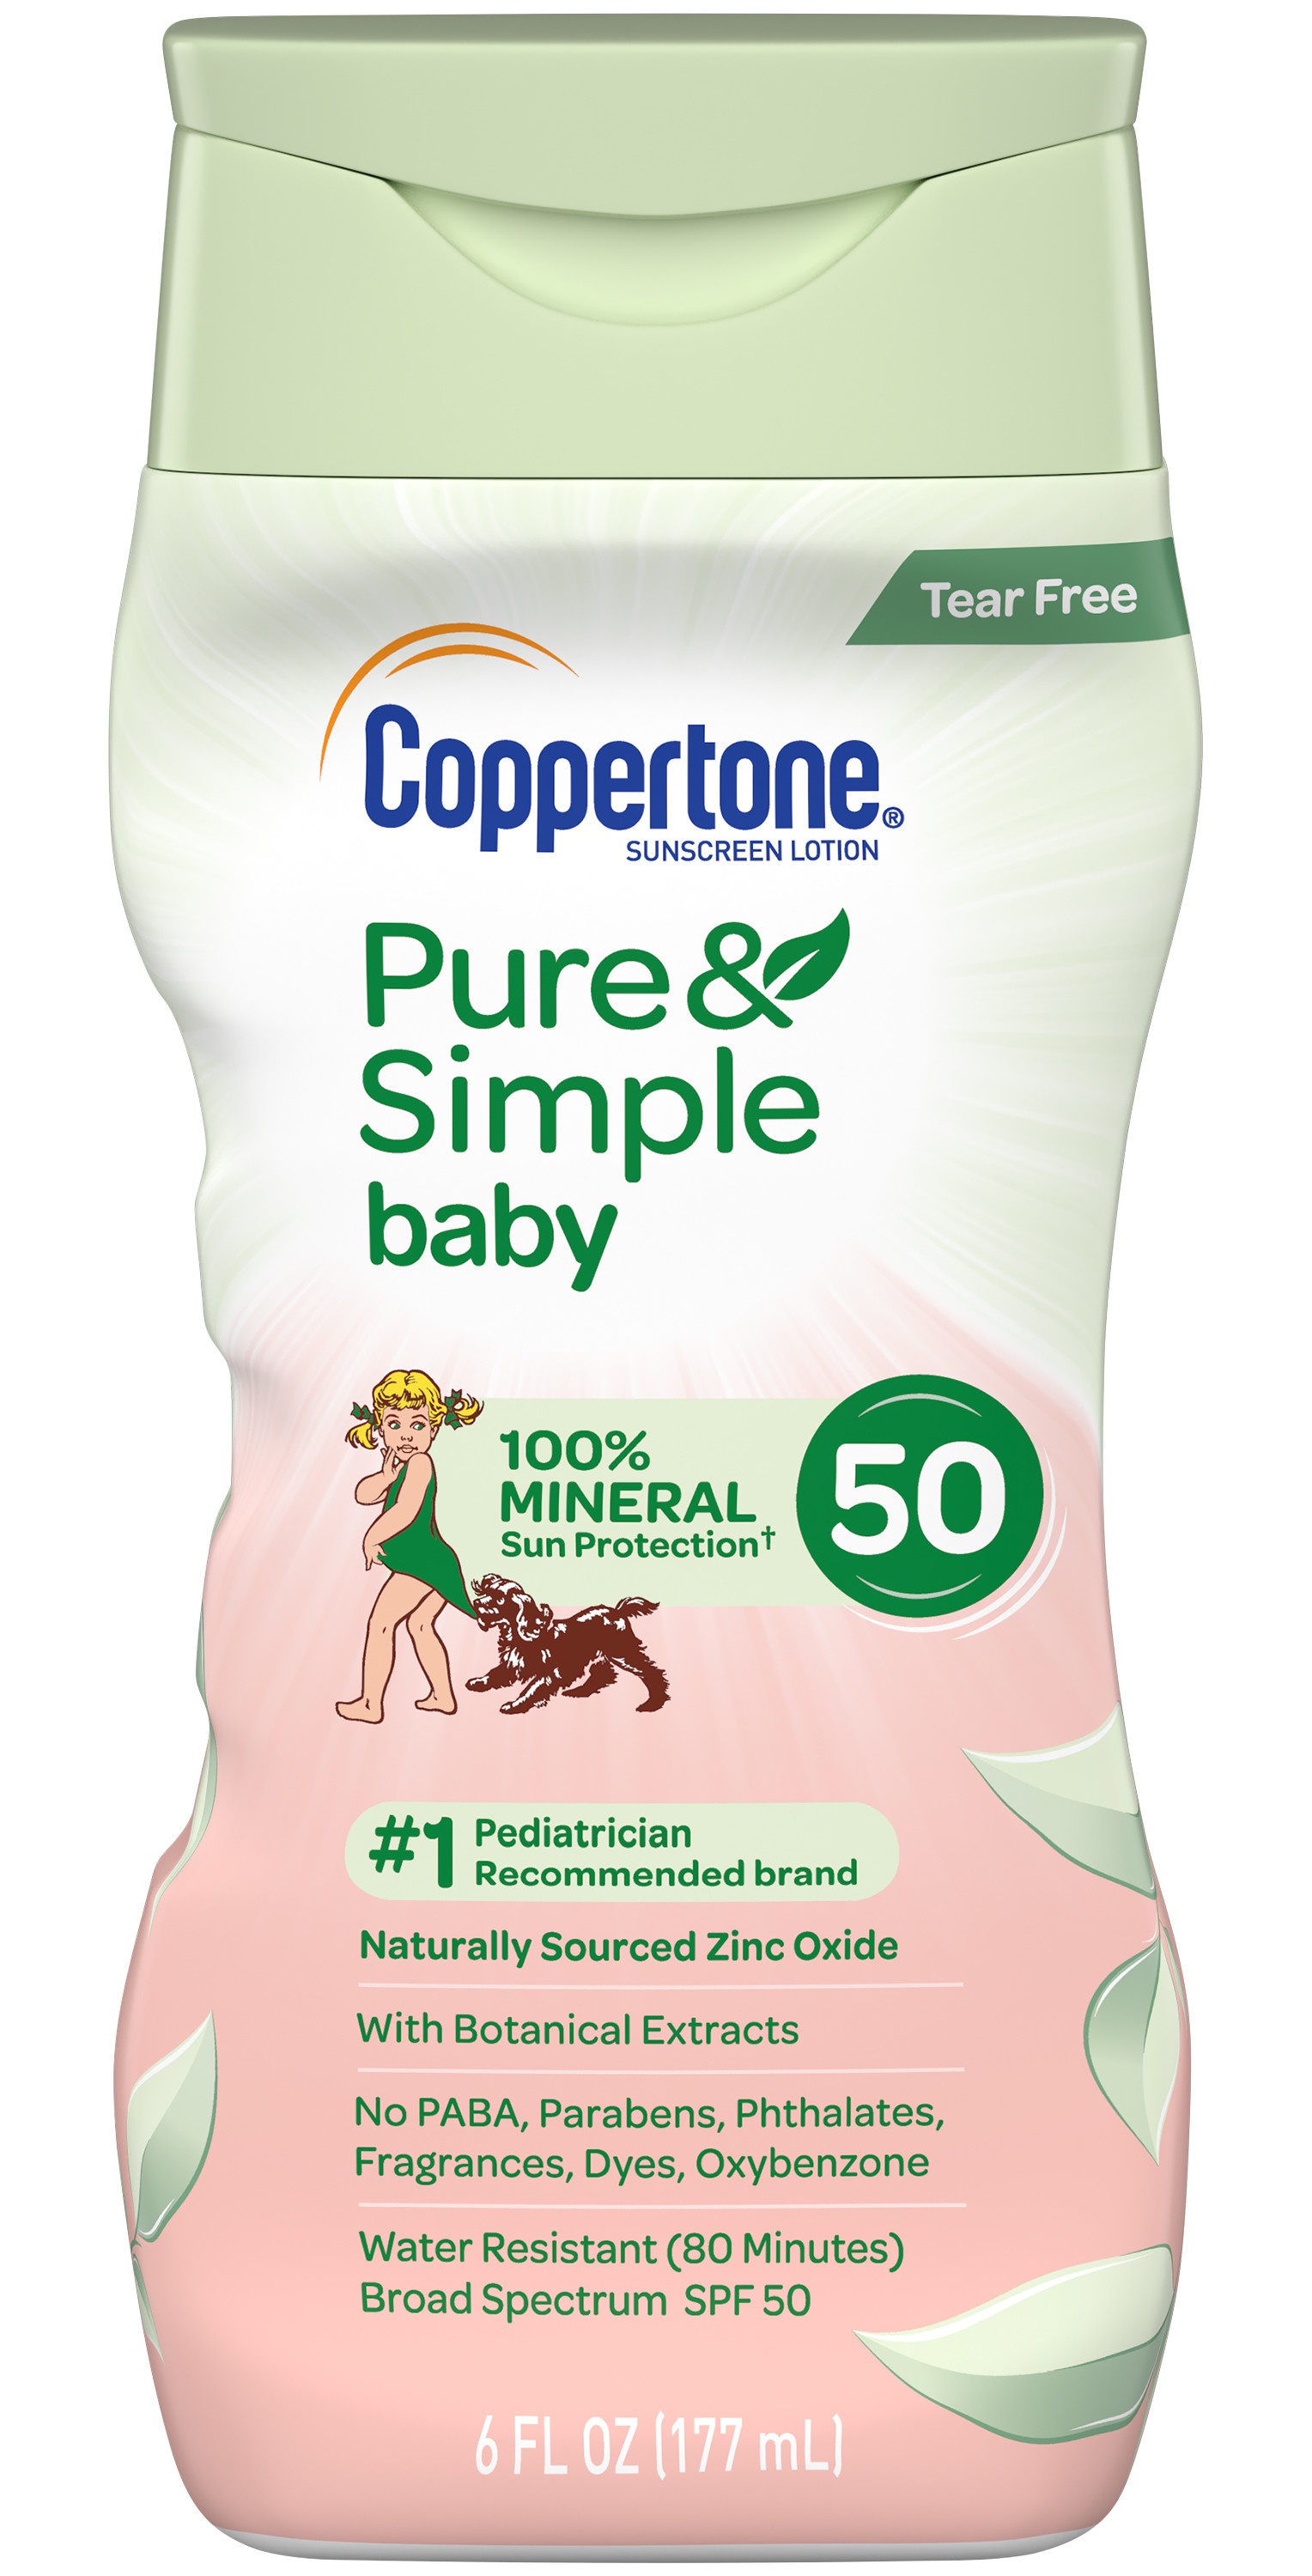 Coppertone Pure & Simple Baby Tear Free Spf 50